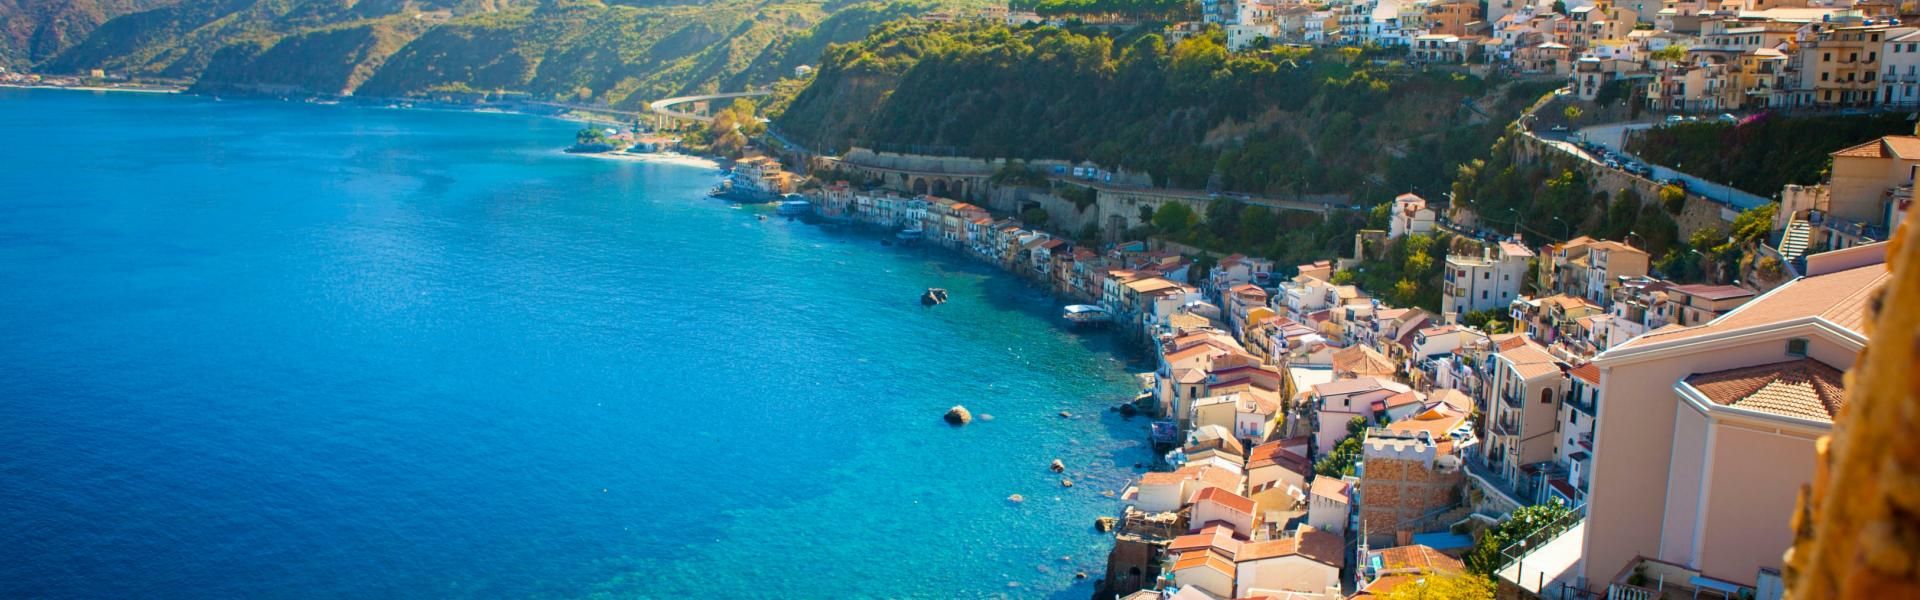 Find the perfect vacation home in Calabria - Casamundo